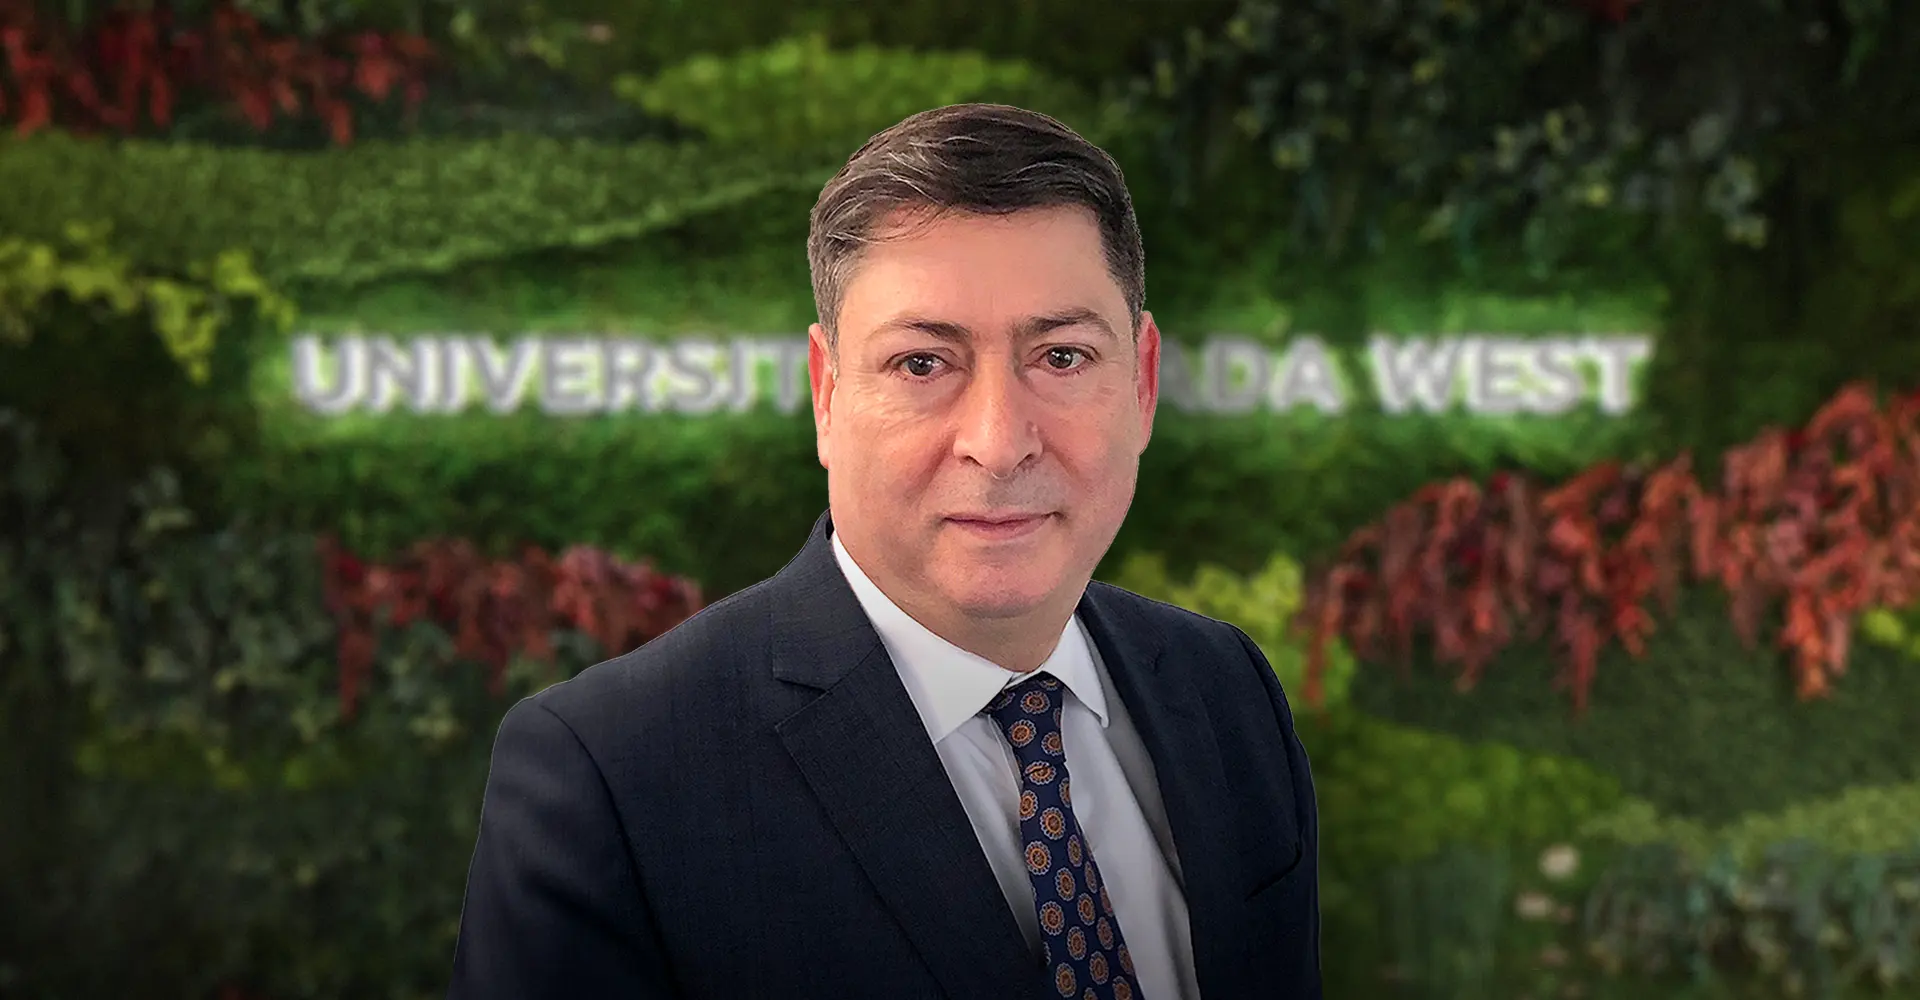  University Canada West Welcomes Dr. Bashir Makhoul as New President